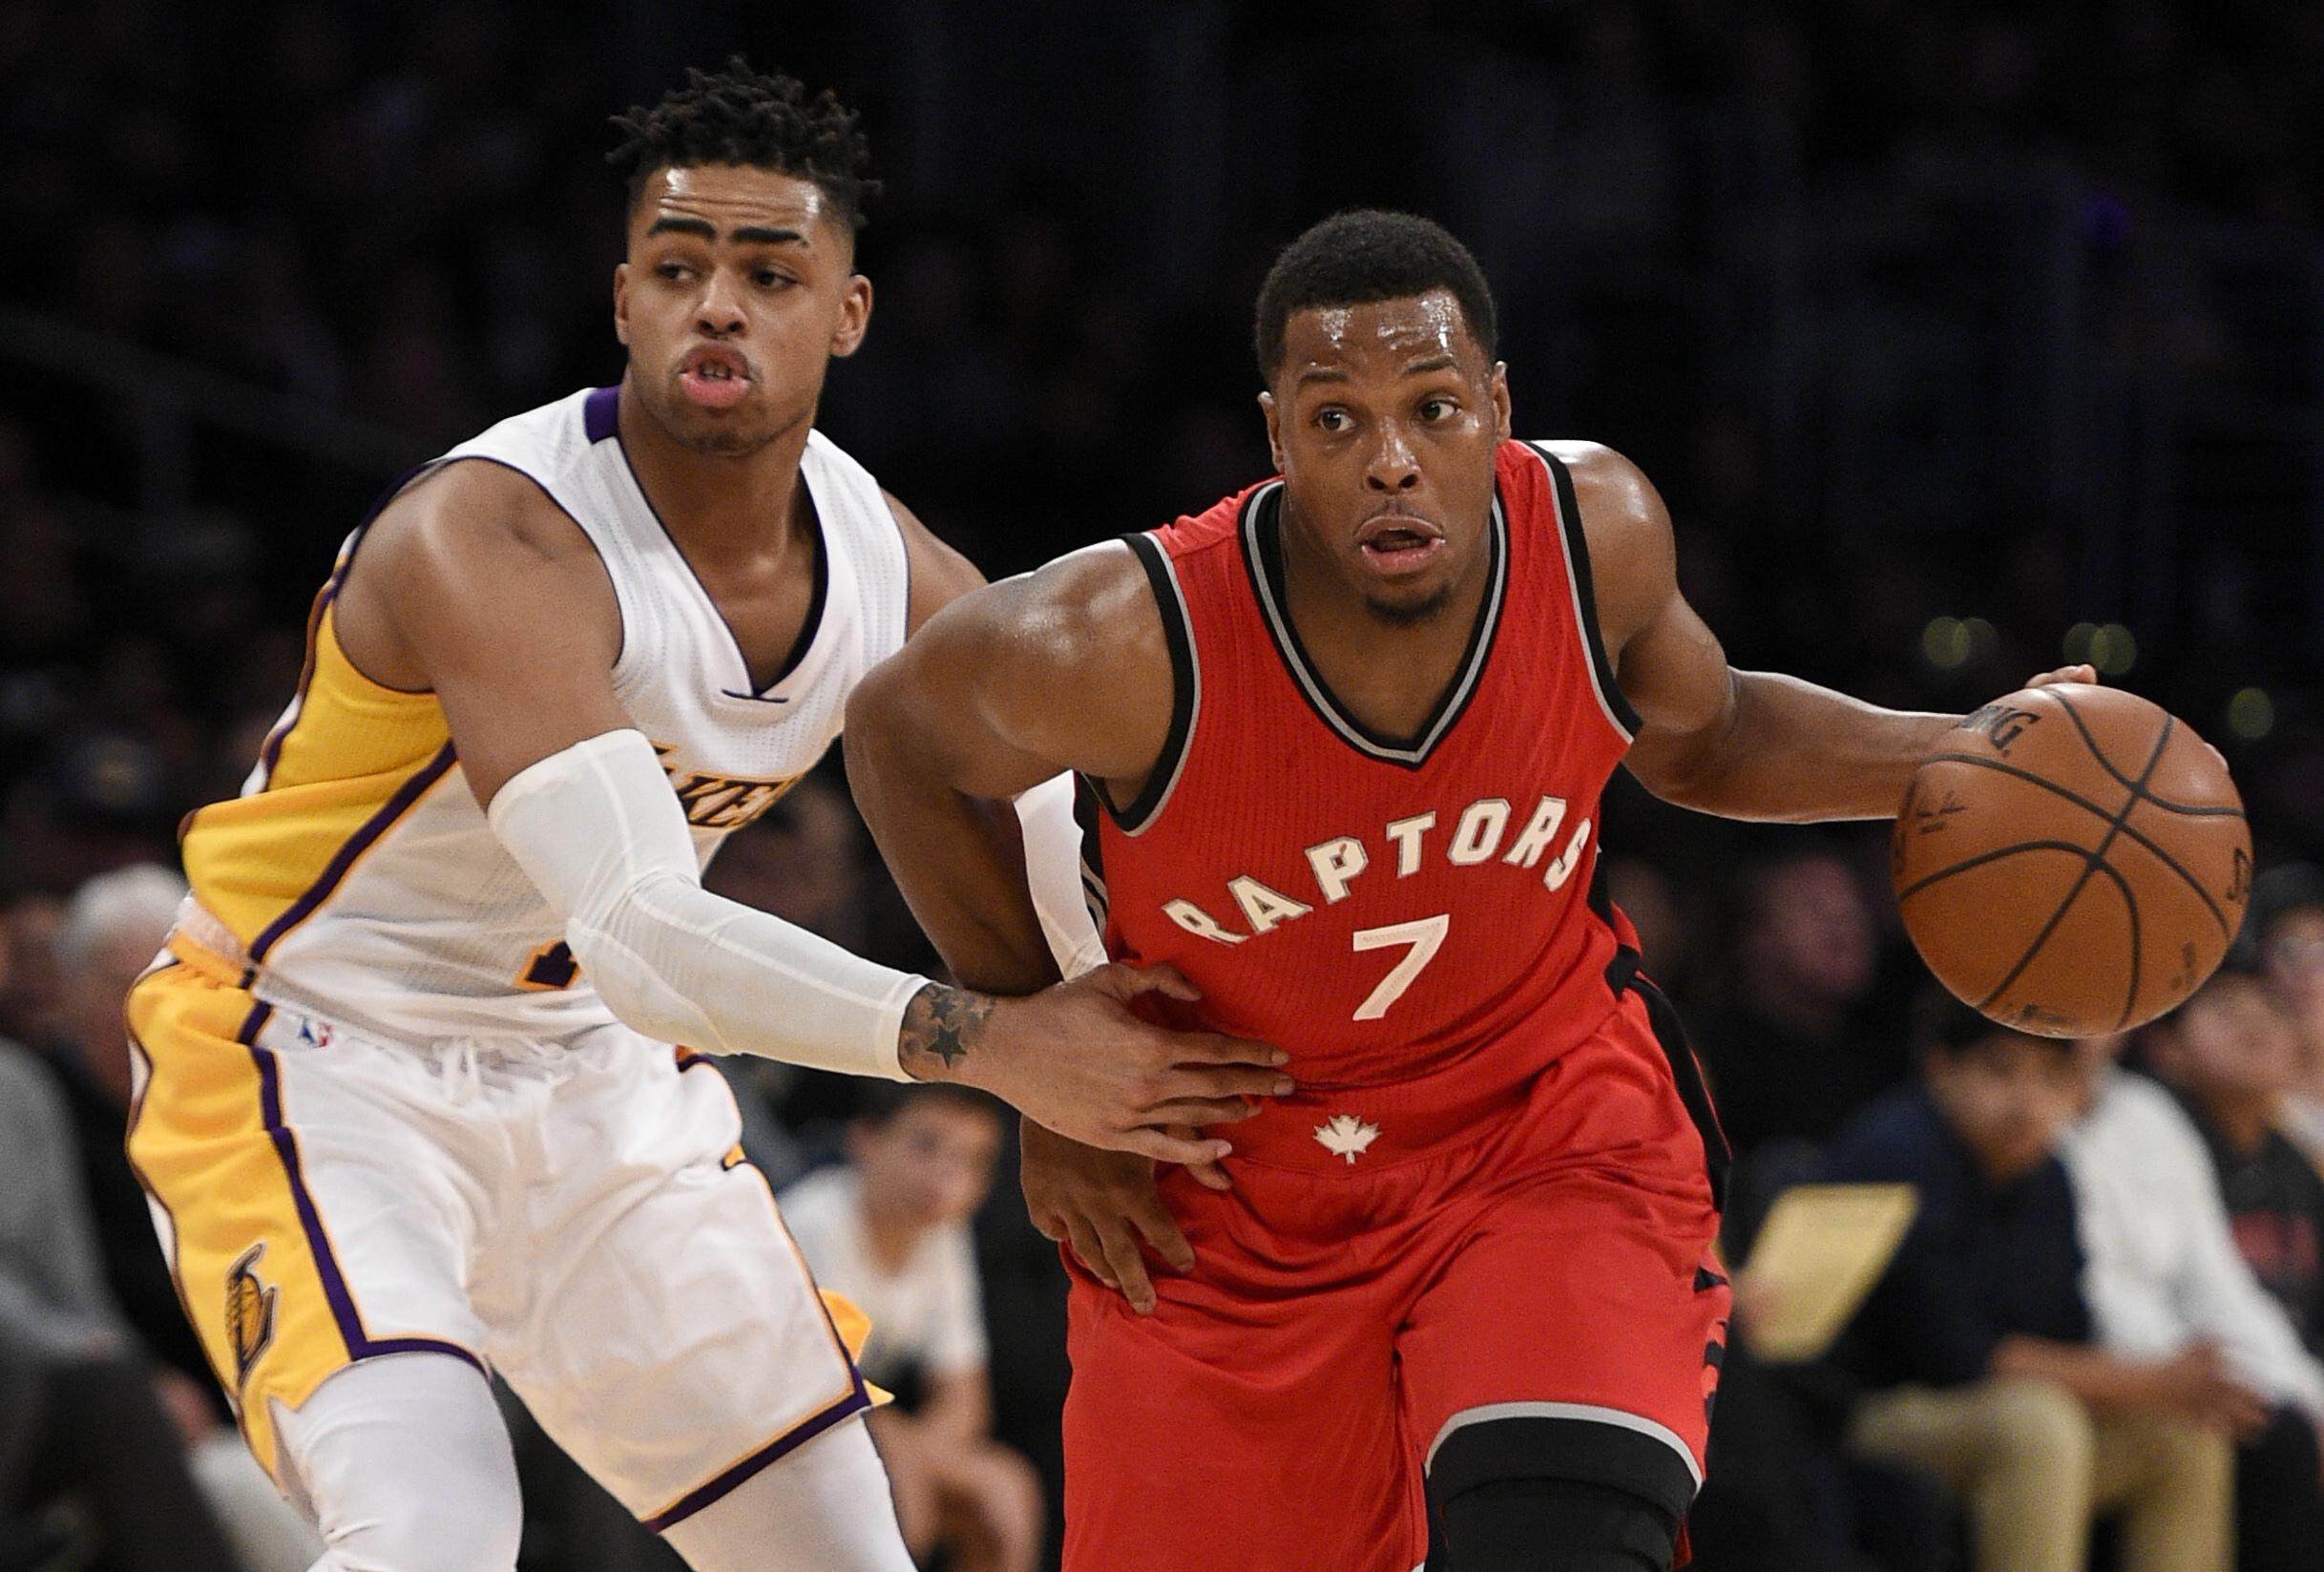 Kyle Lowry scores 41 as Raptors hold off Lakers, 123-114